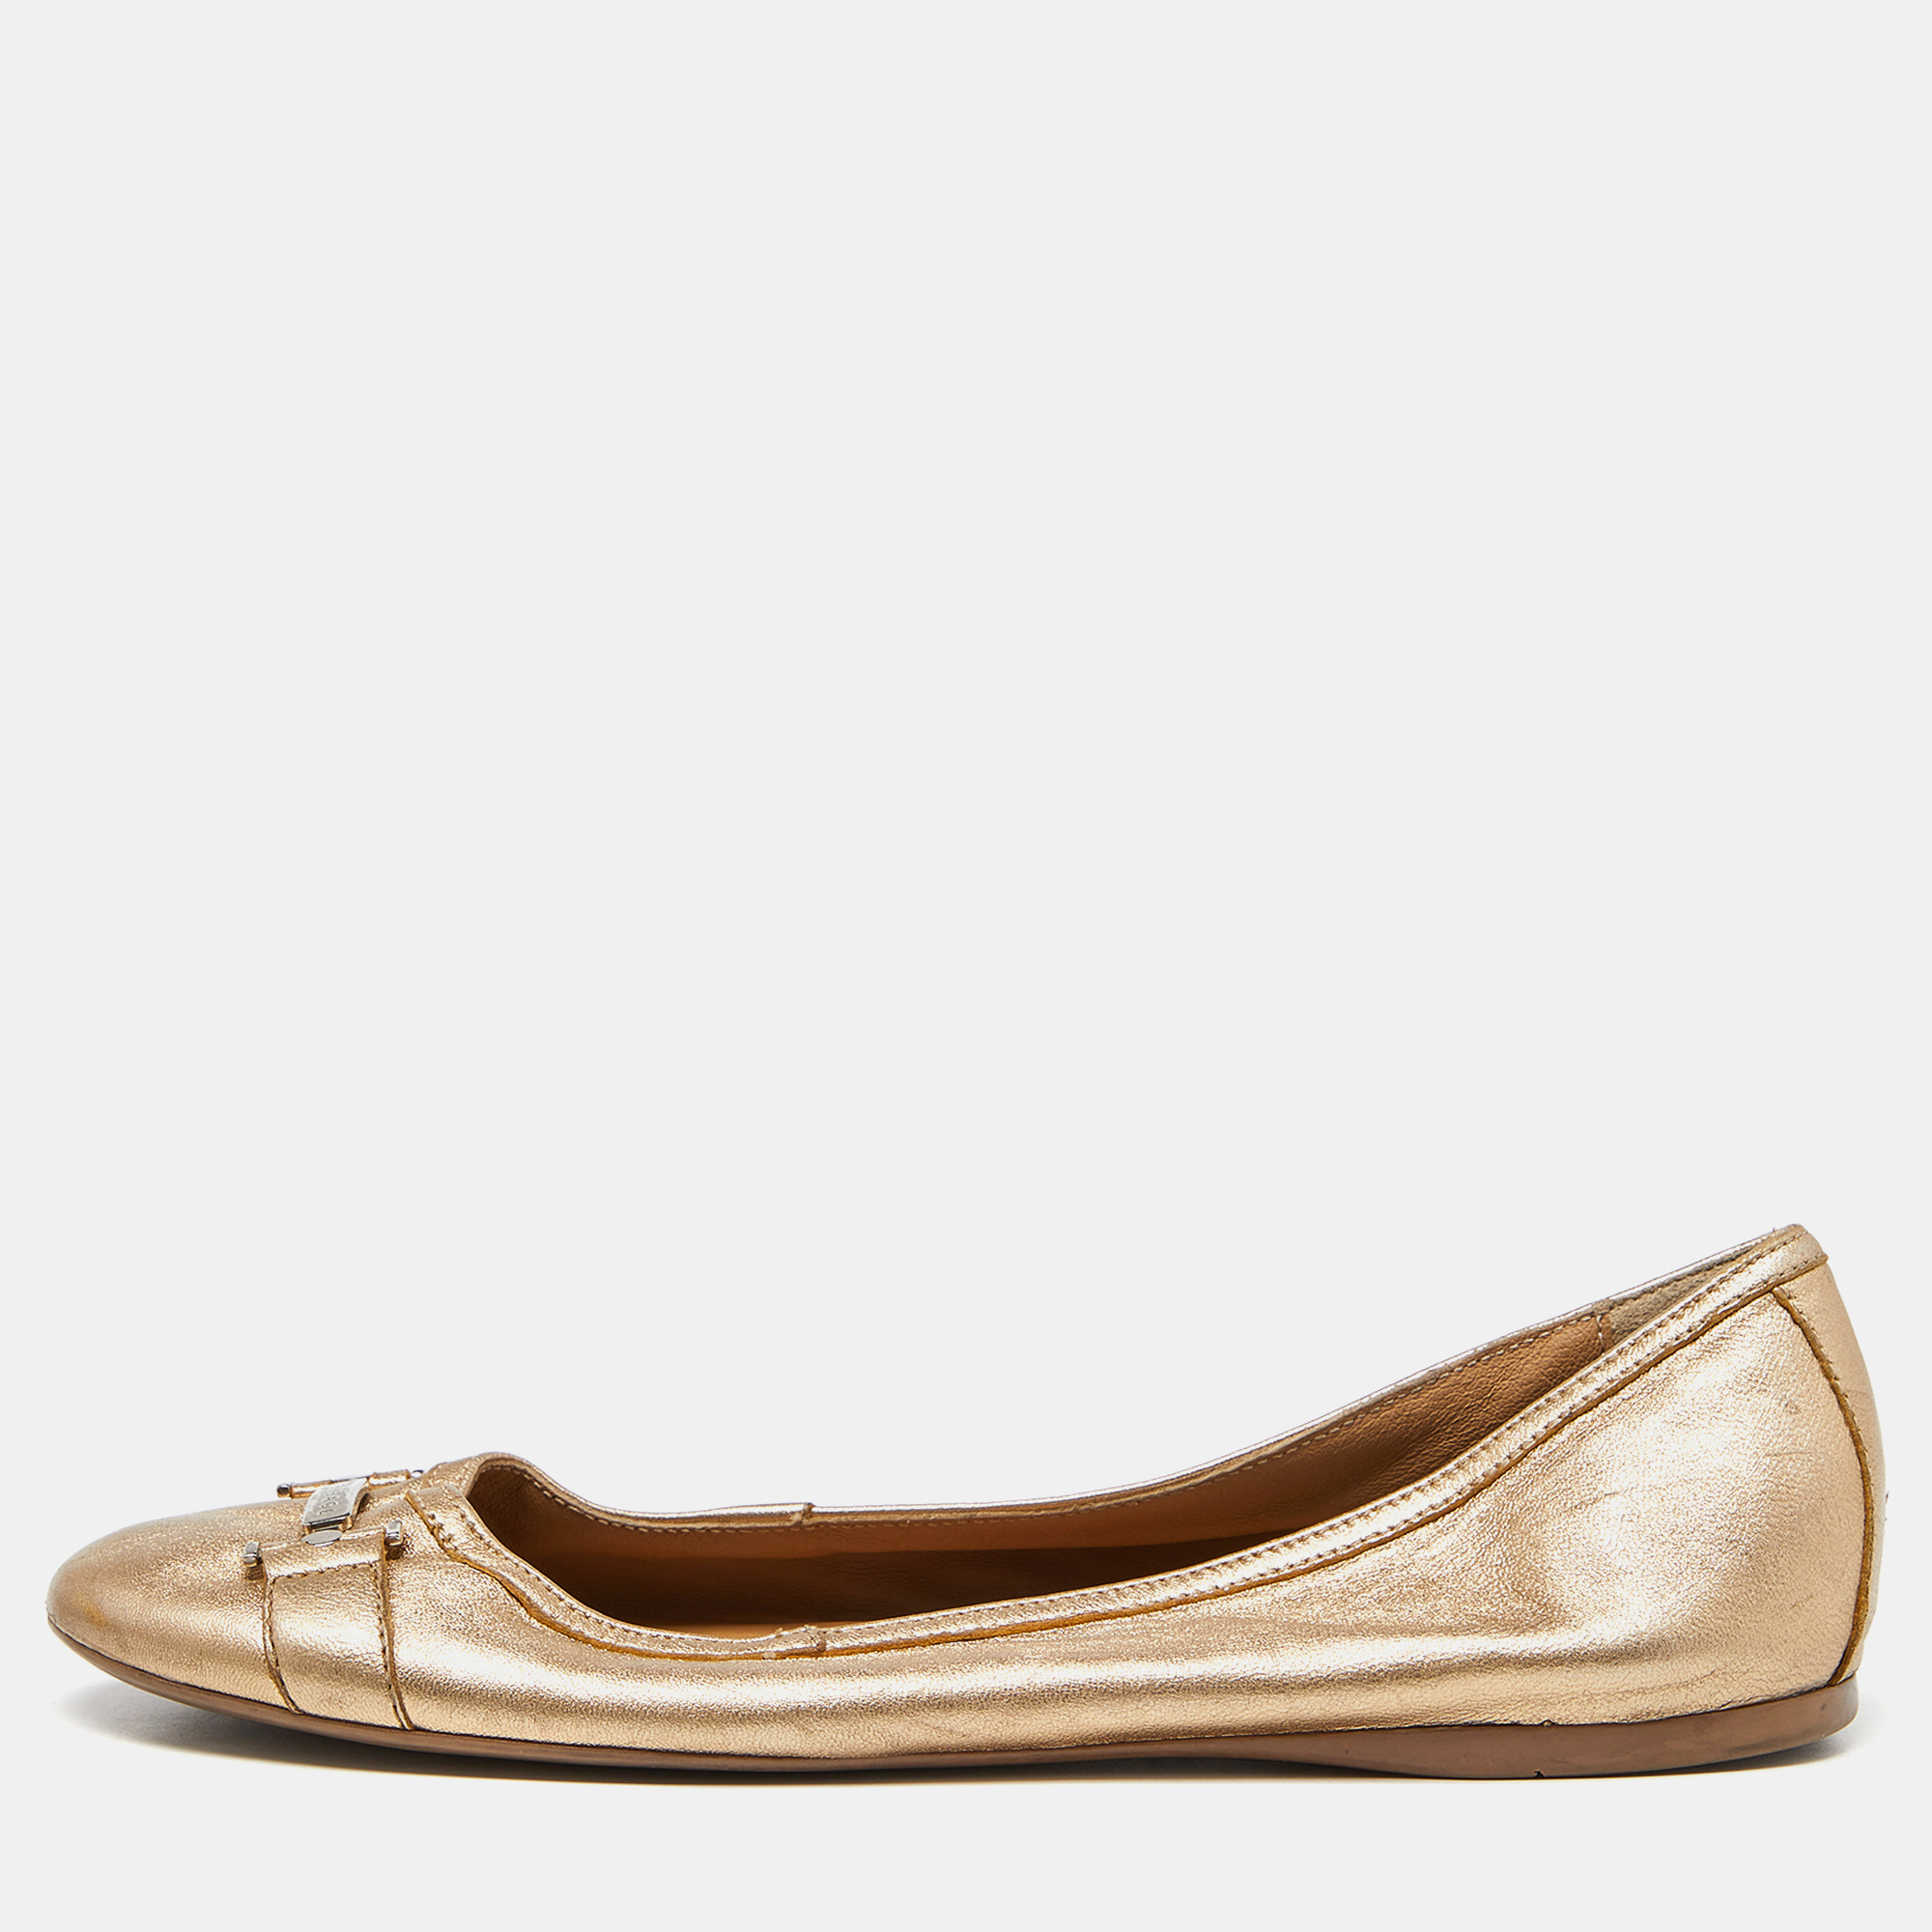 Pre-owned Versace Gold Leather Ballet Flats Size 37